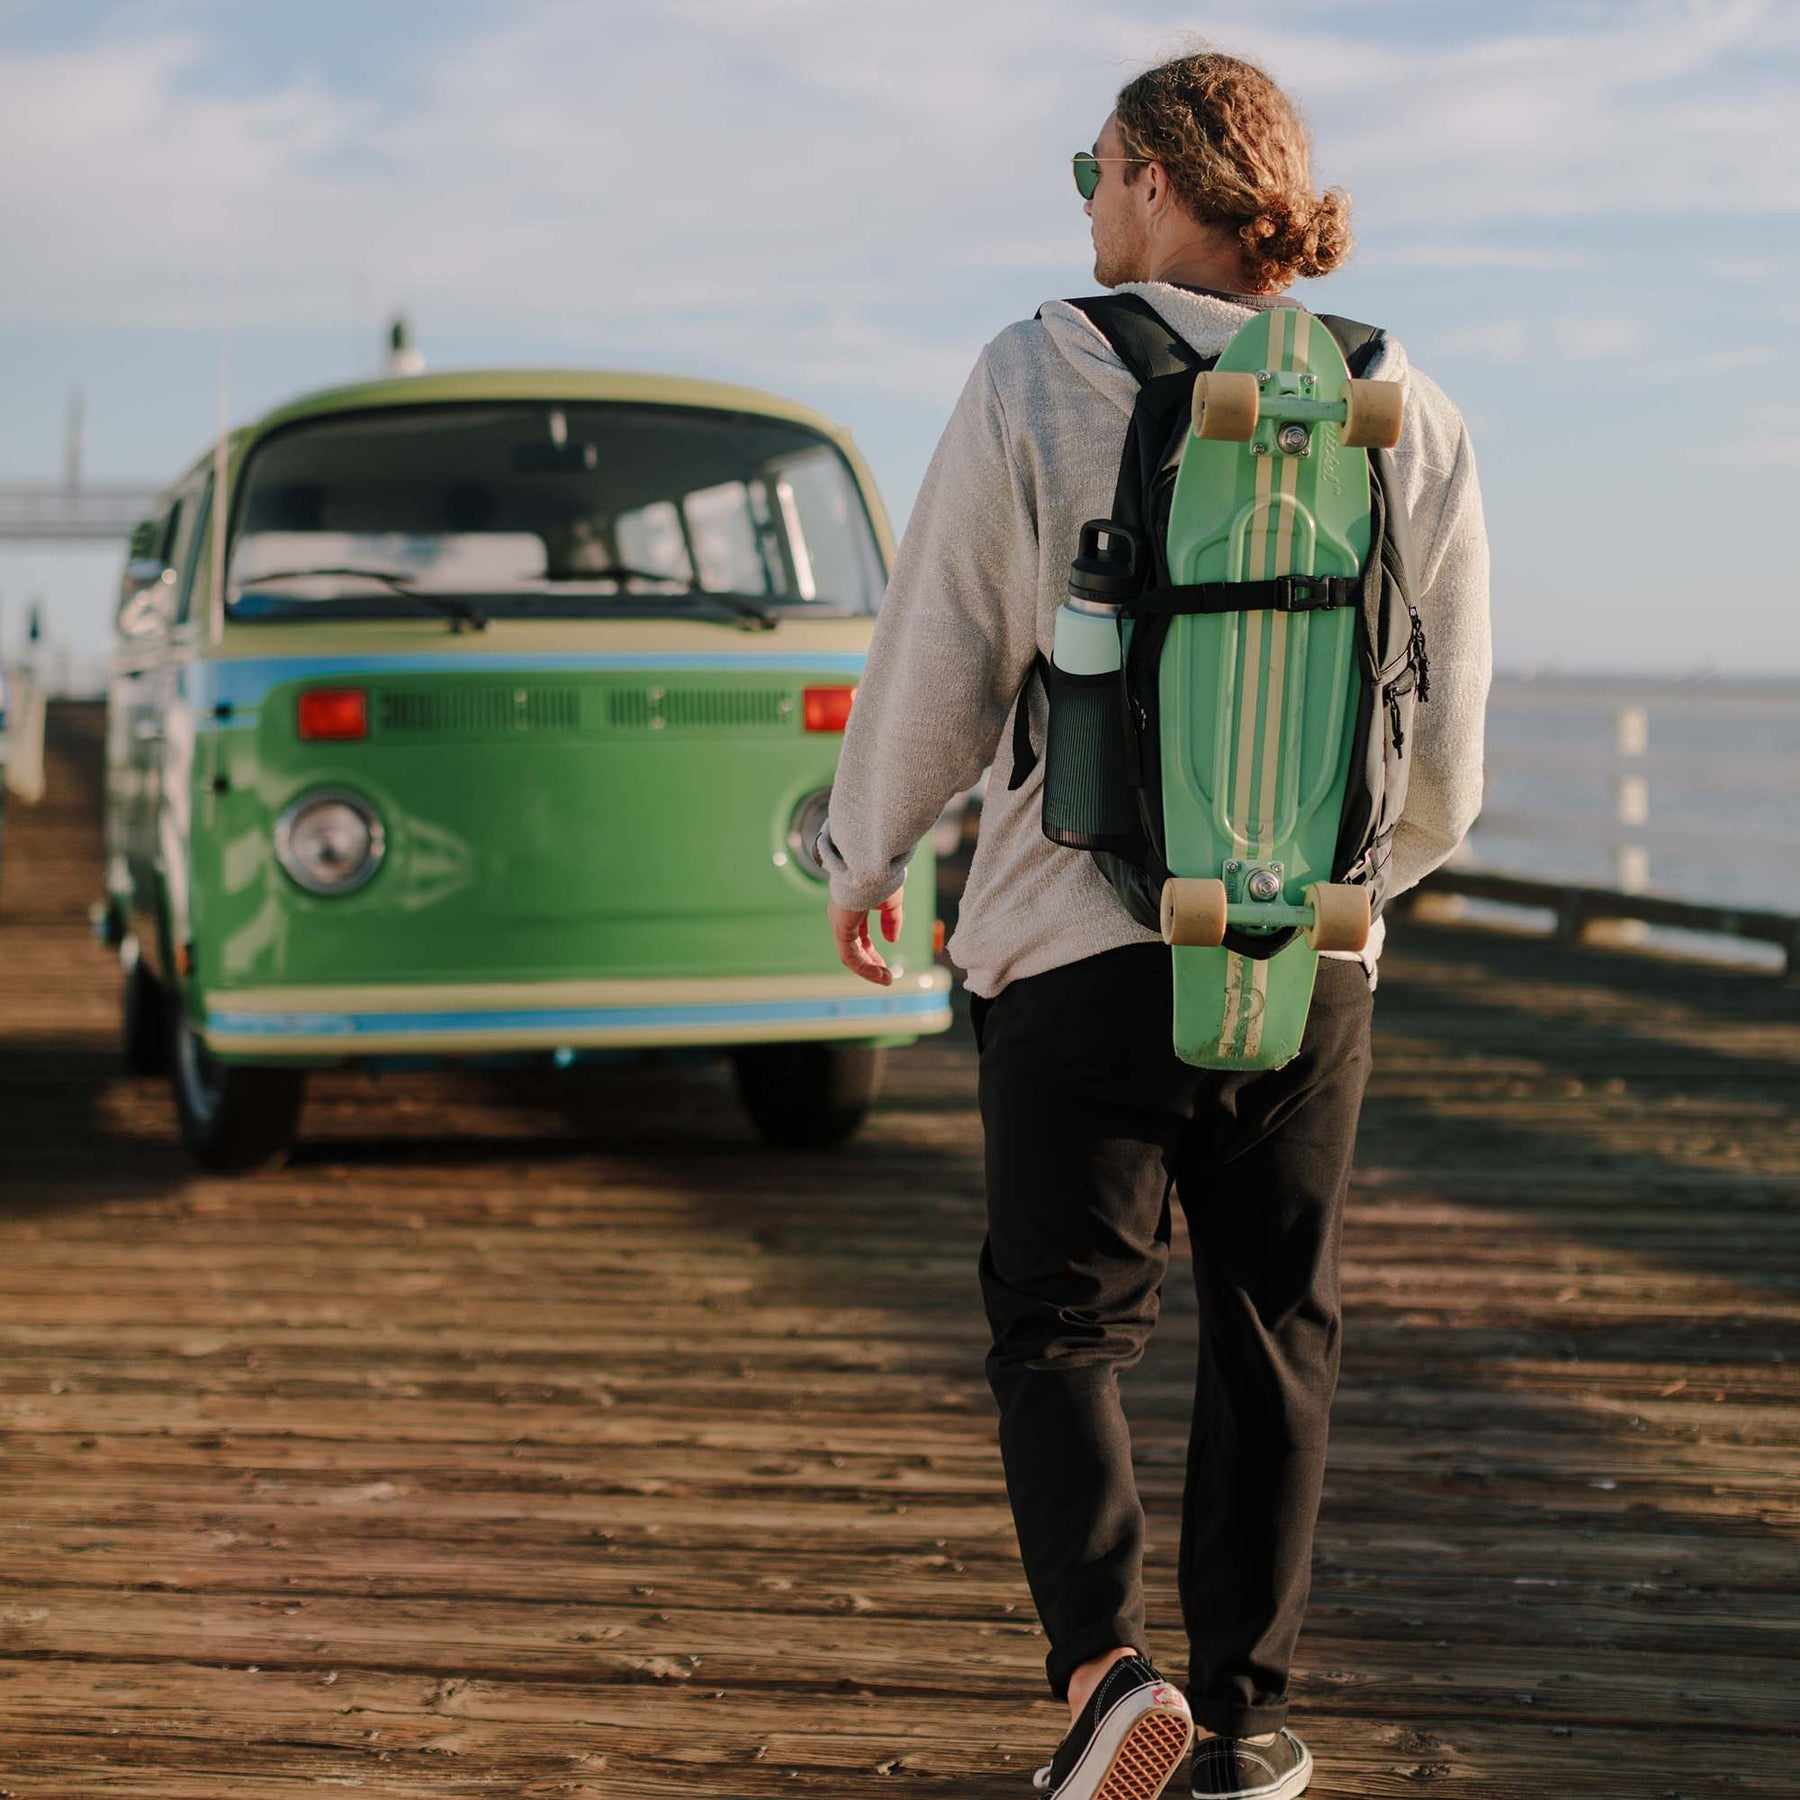 The Essential Skateboard Bag: Keeping Your Gear Safe and Portable